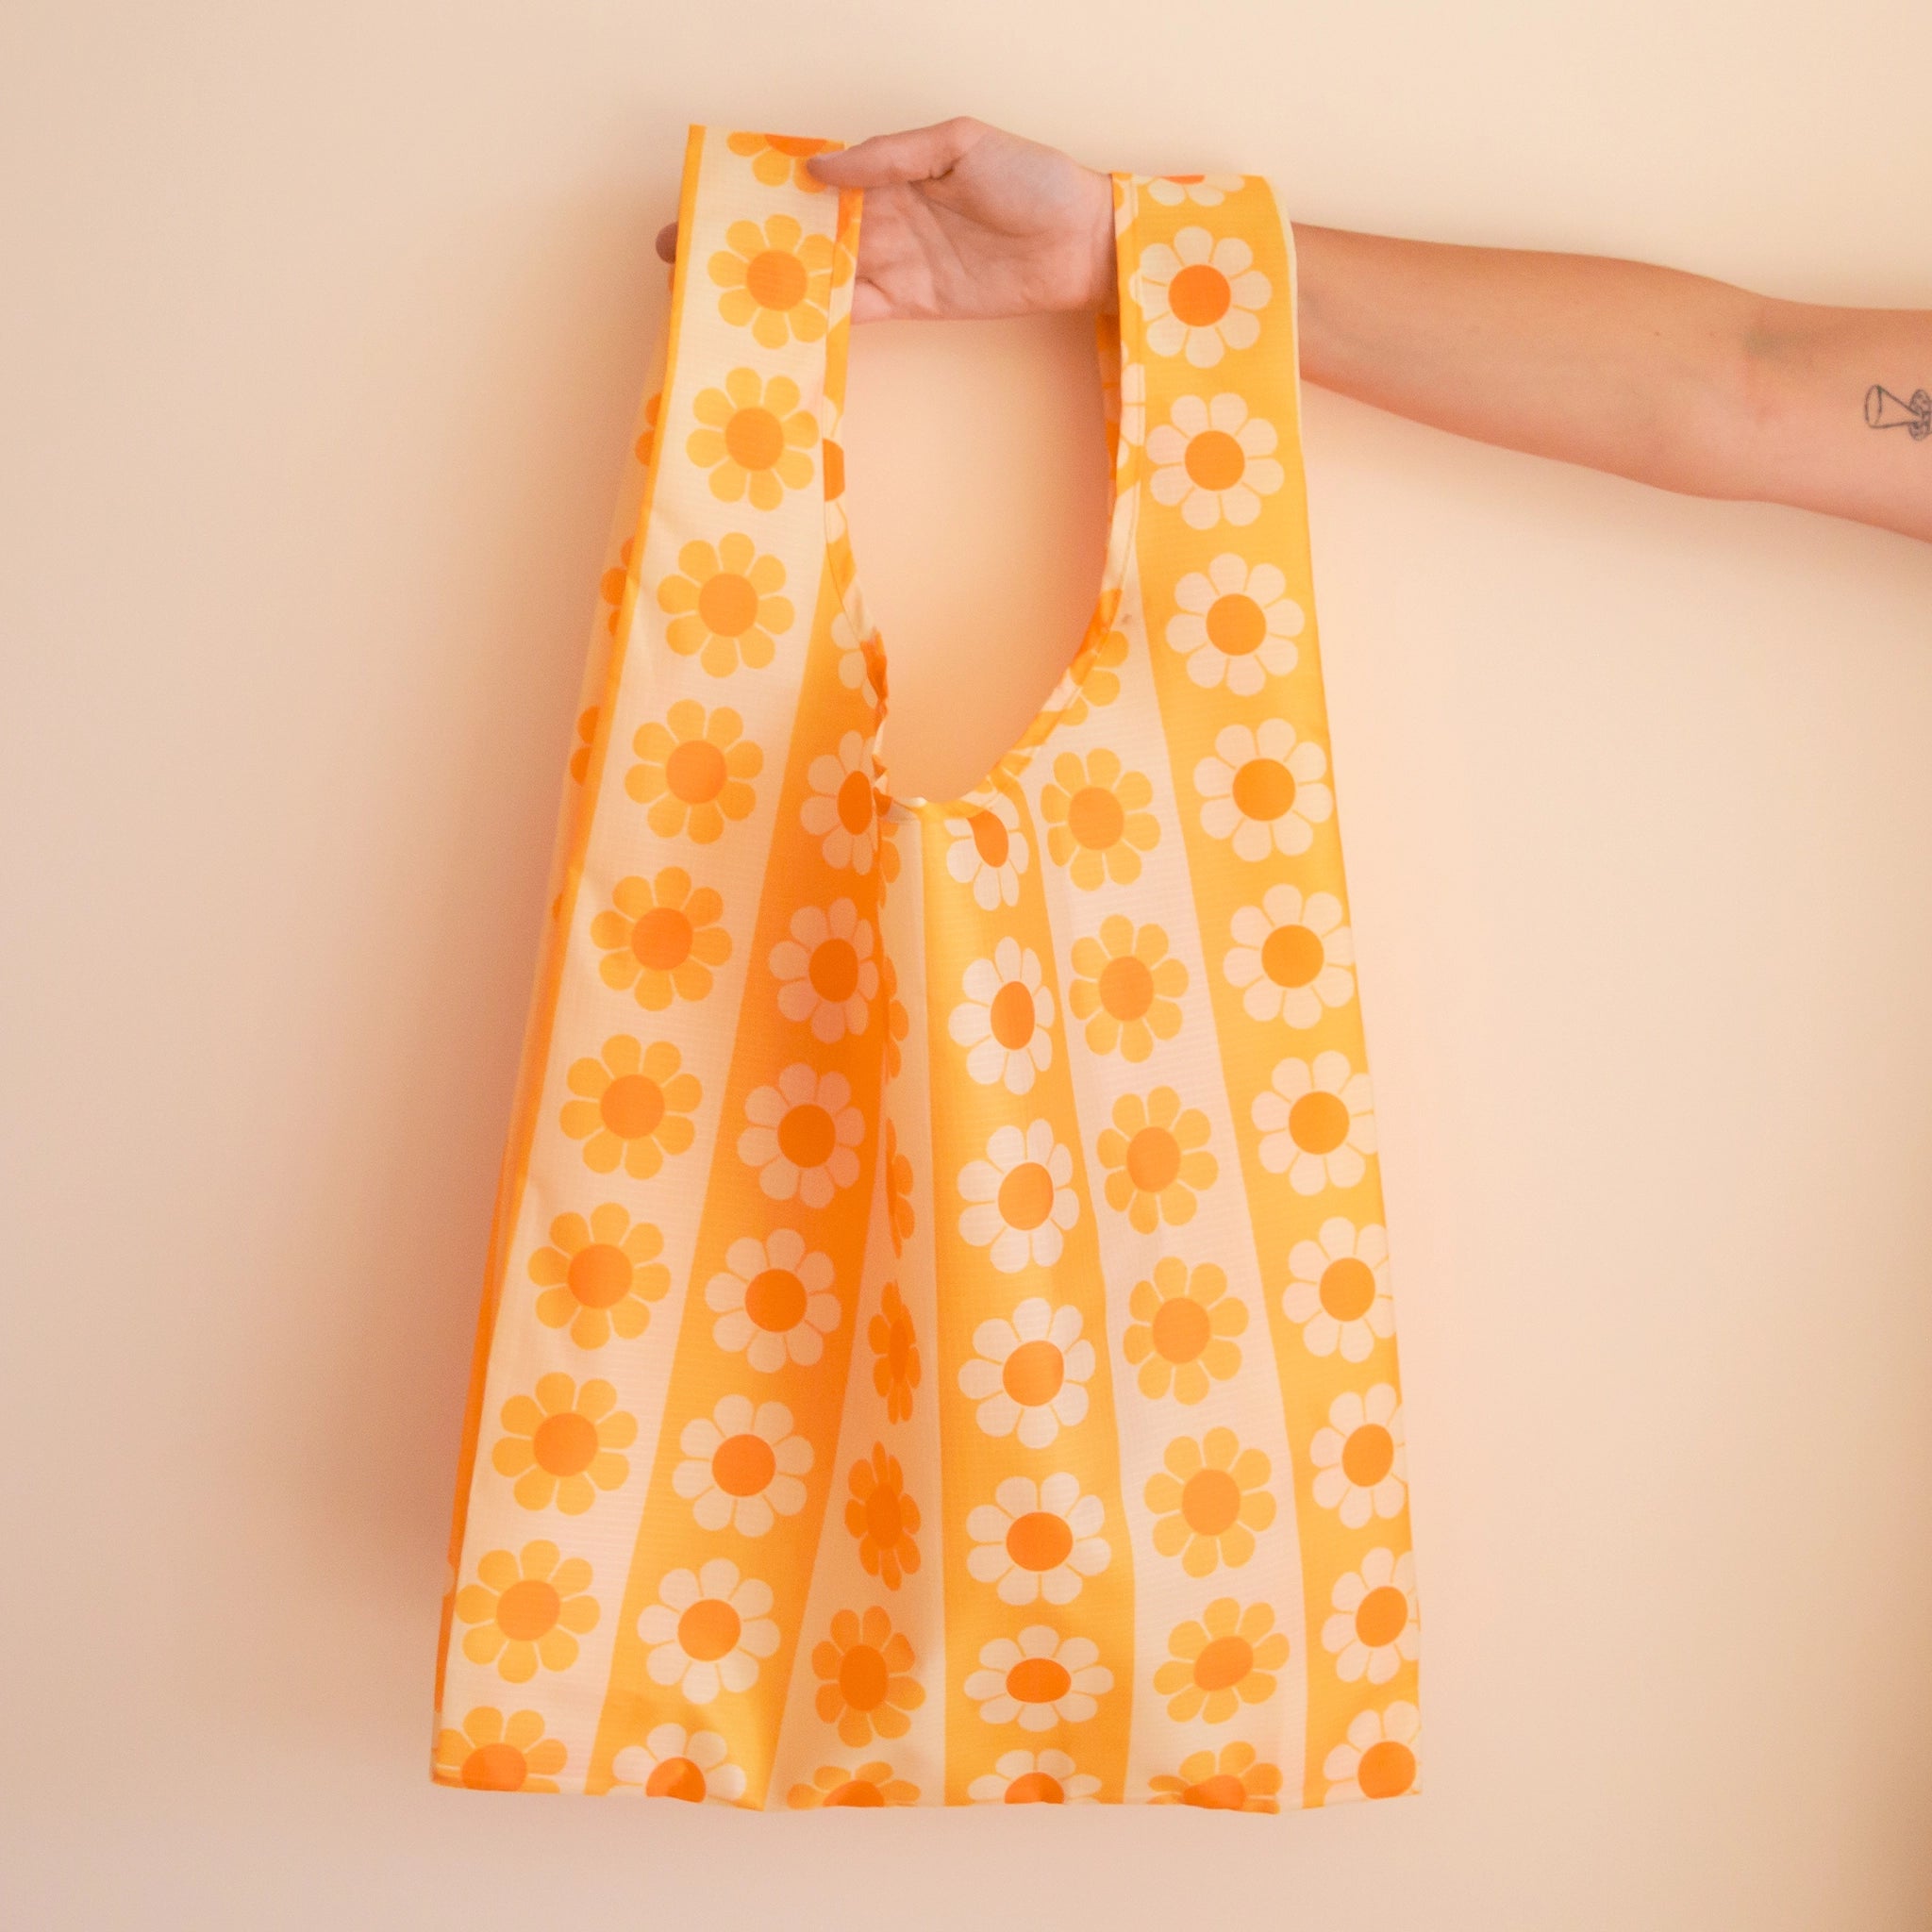 On a tan background if a model&#39;s hand holding out a reusable nylon bag with a yellow and orange daisy pattern.